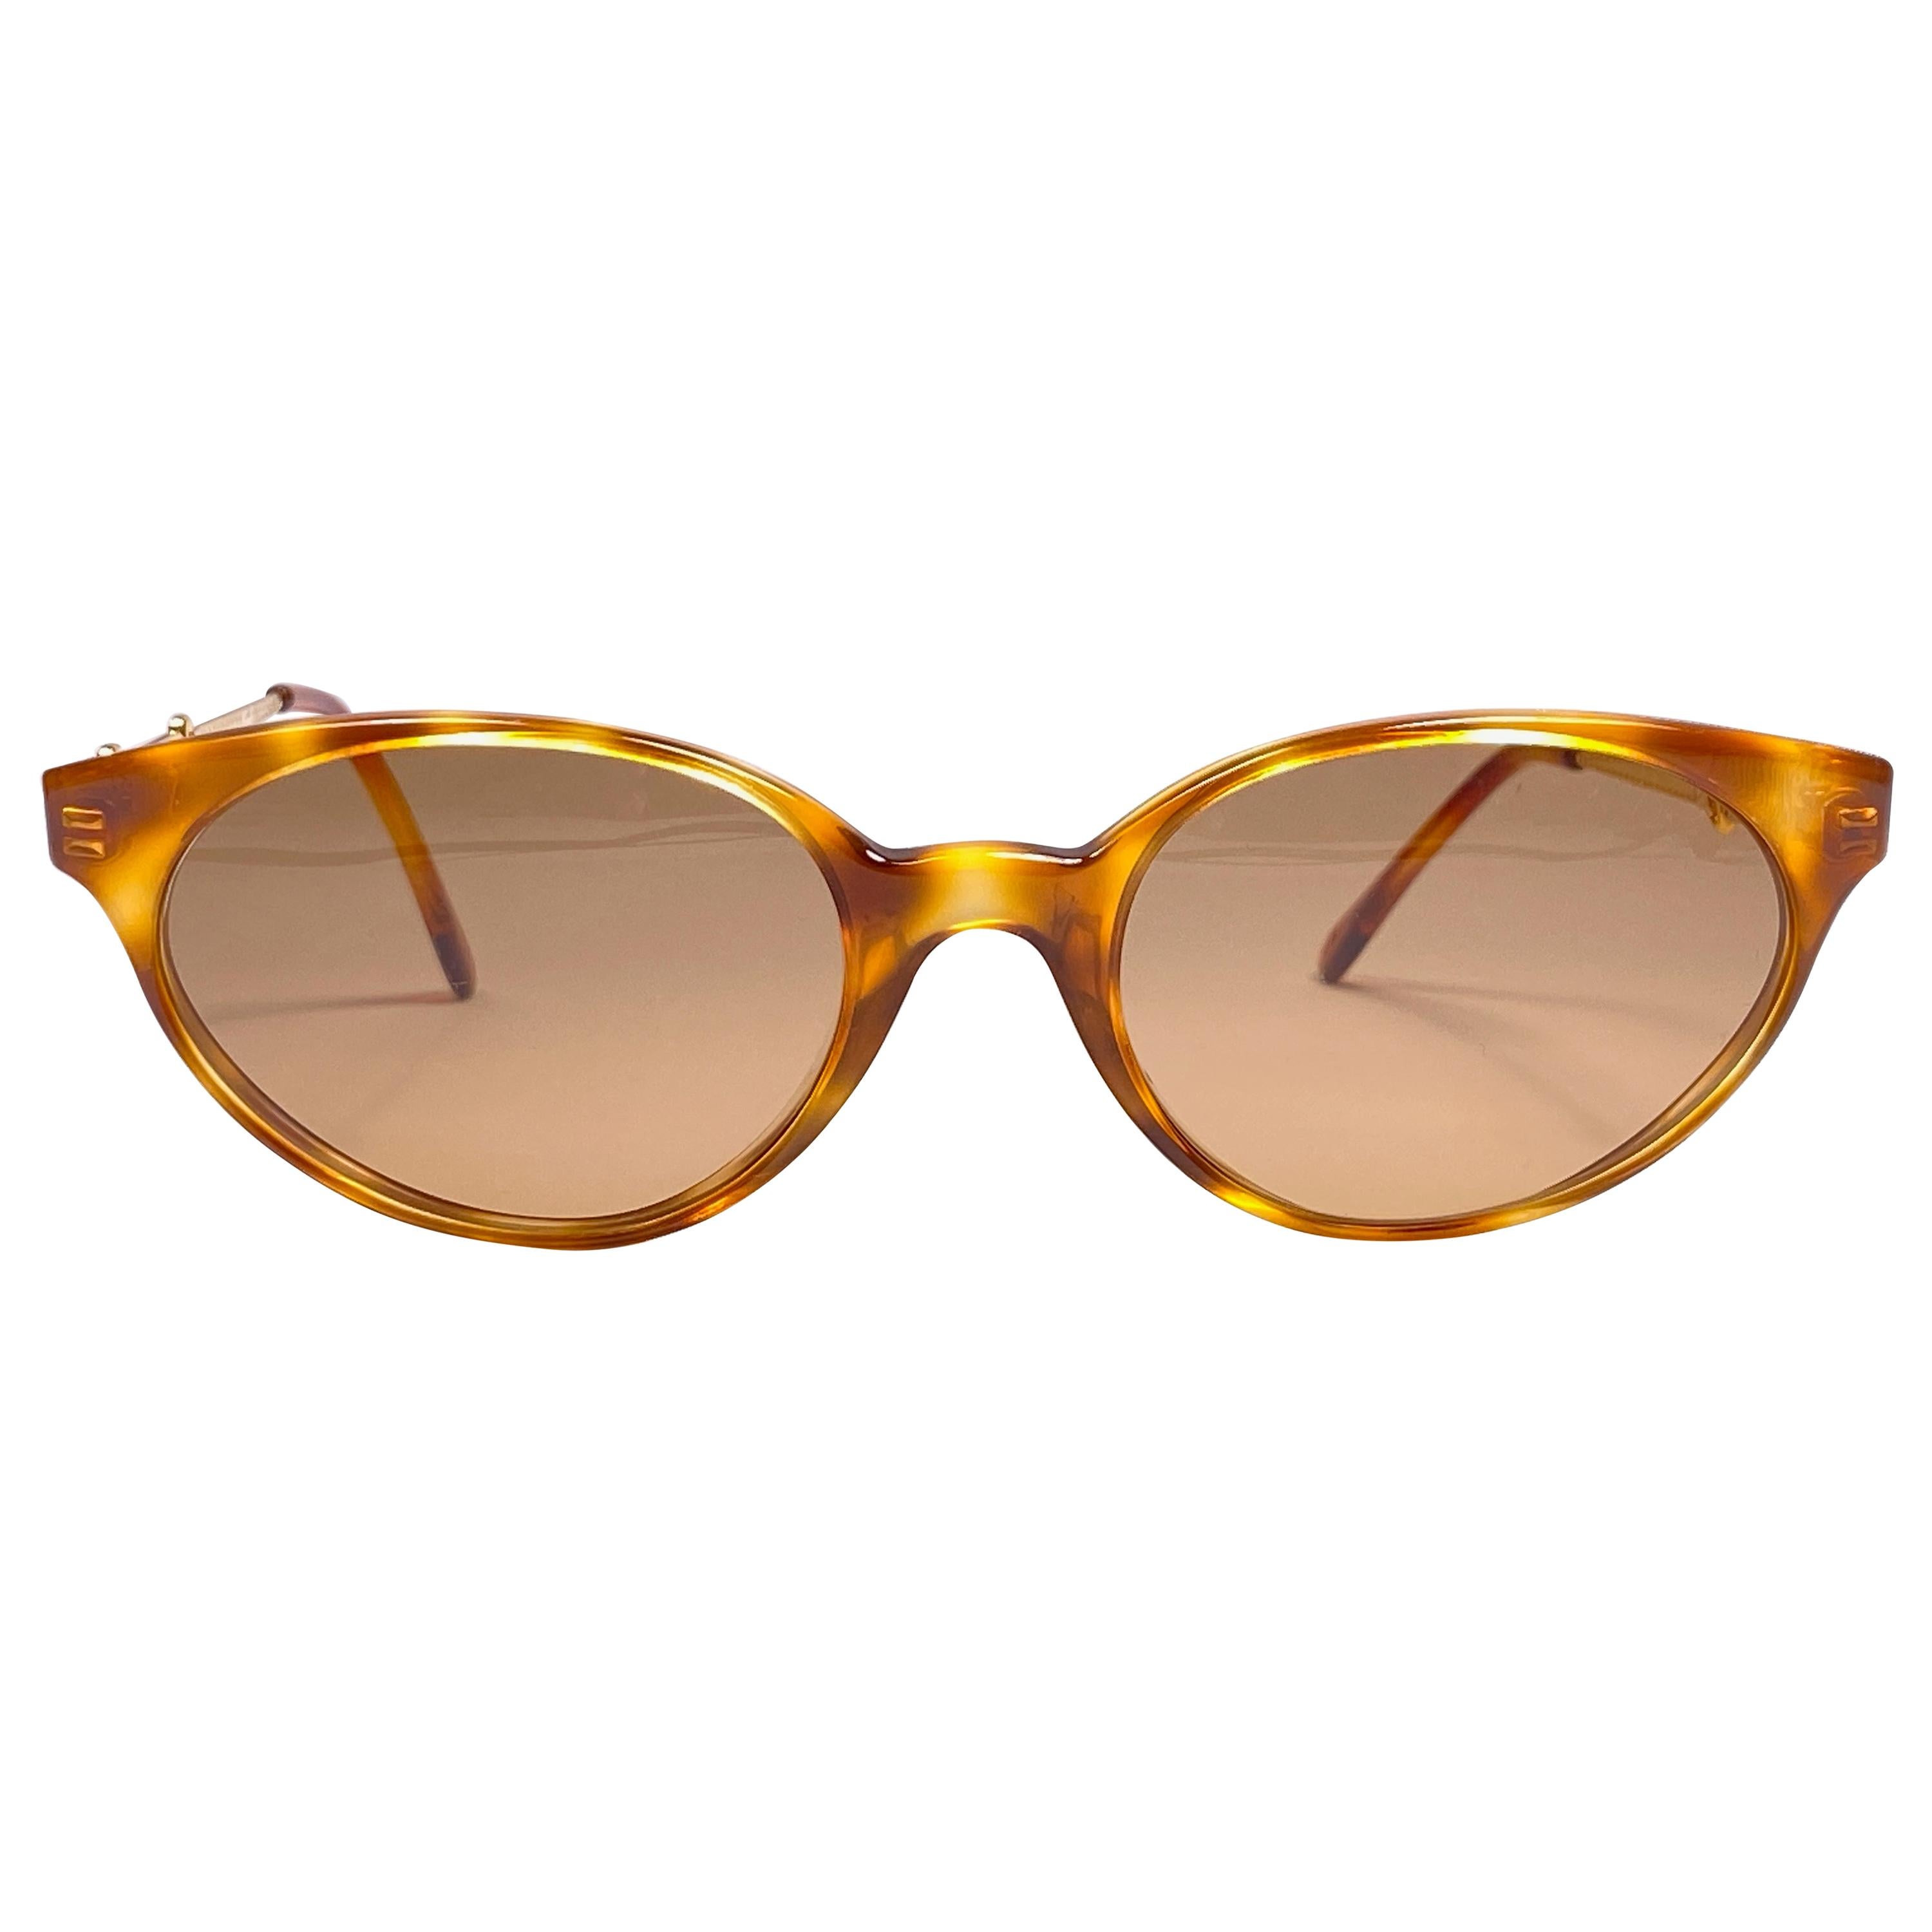 New Vintage Moschino By Persol Tortoise MF963 Cat Eye Sunglasses Made in Italy For Sale